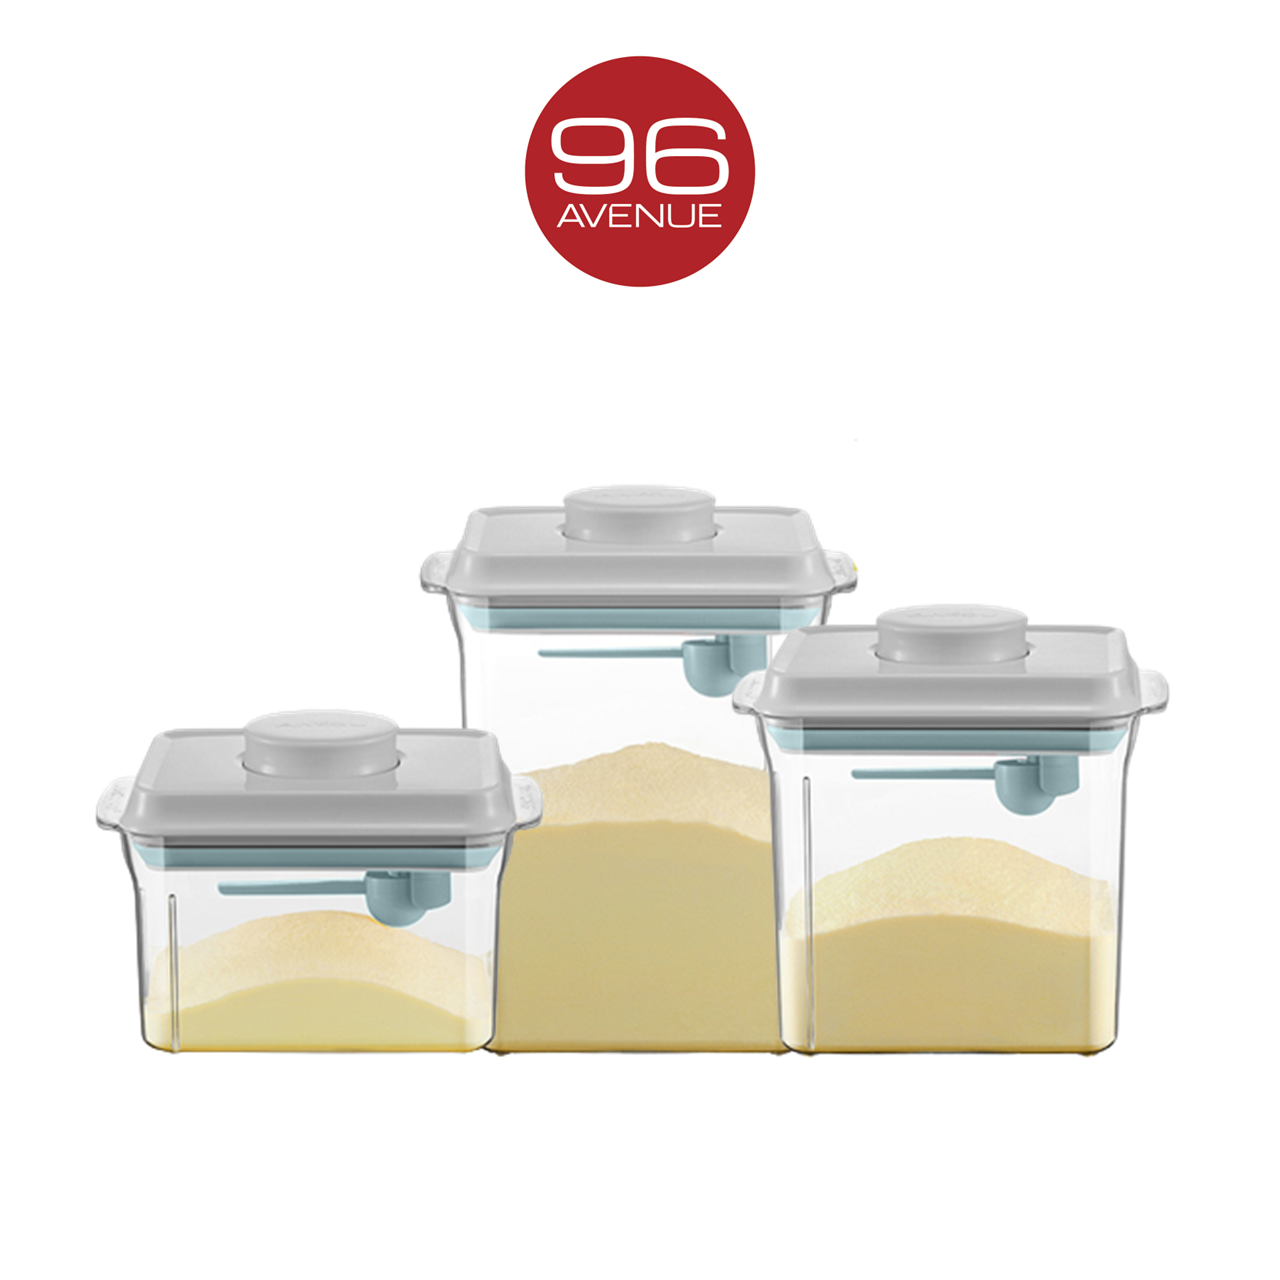 ANKOU AirTight Milk Powder Container with Scraper - Rectangle Clear 1700ml